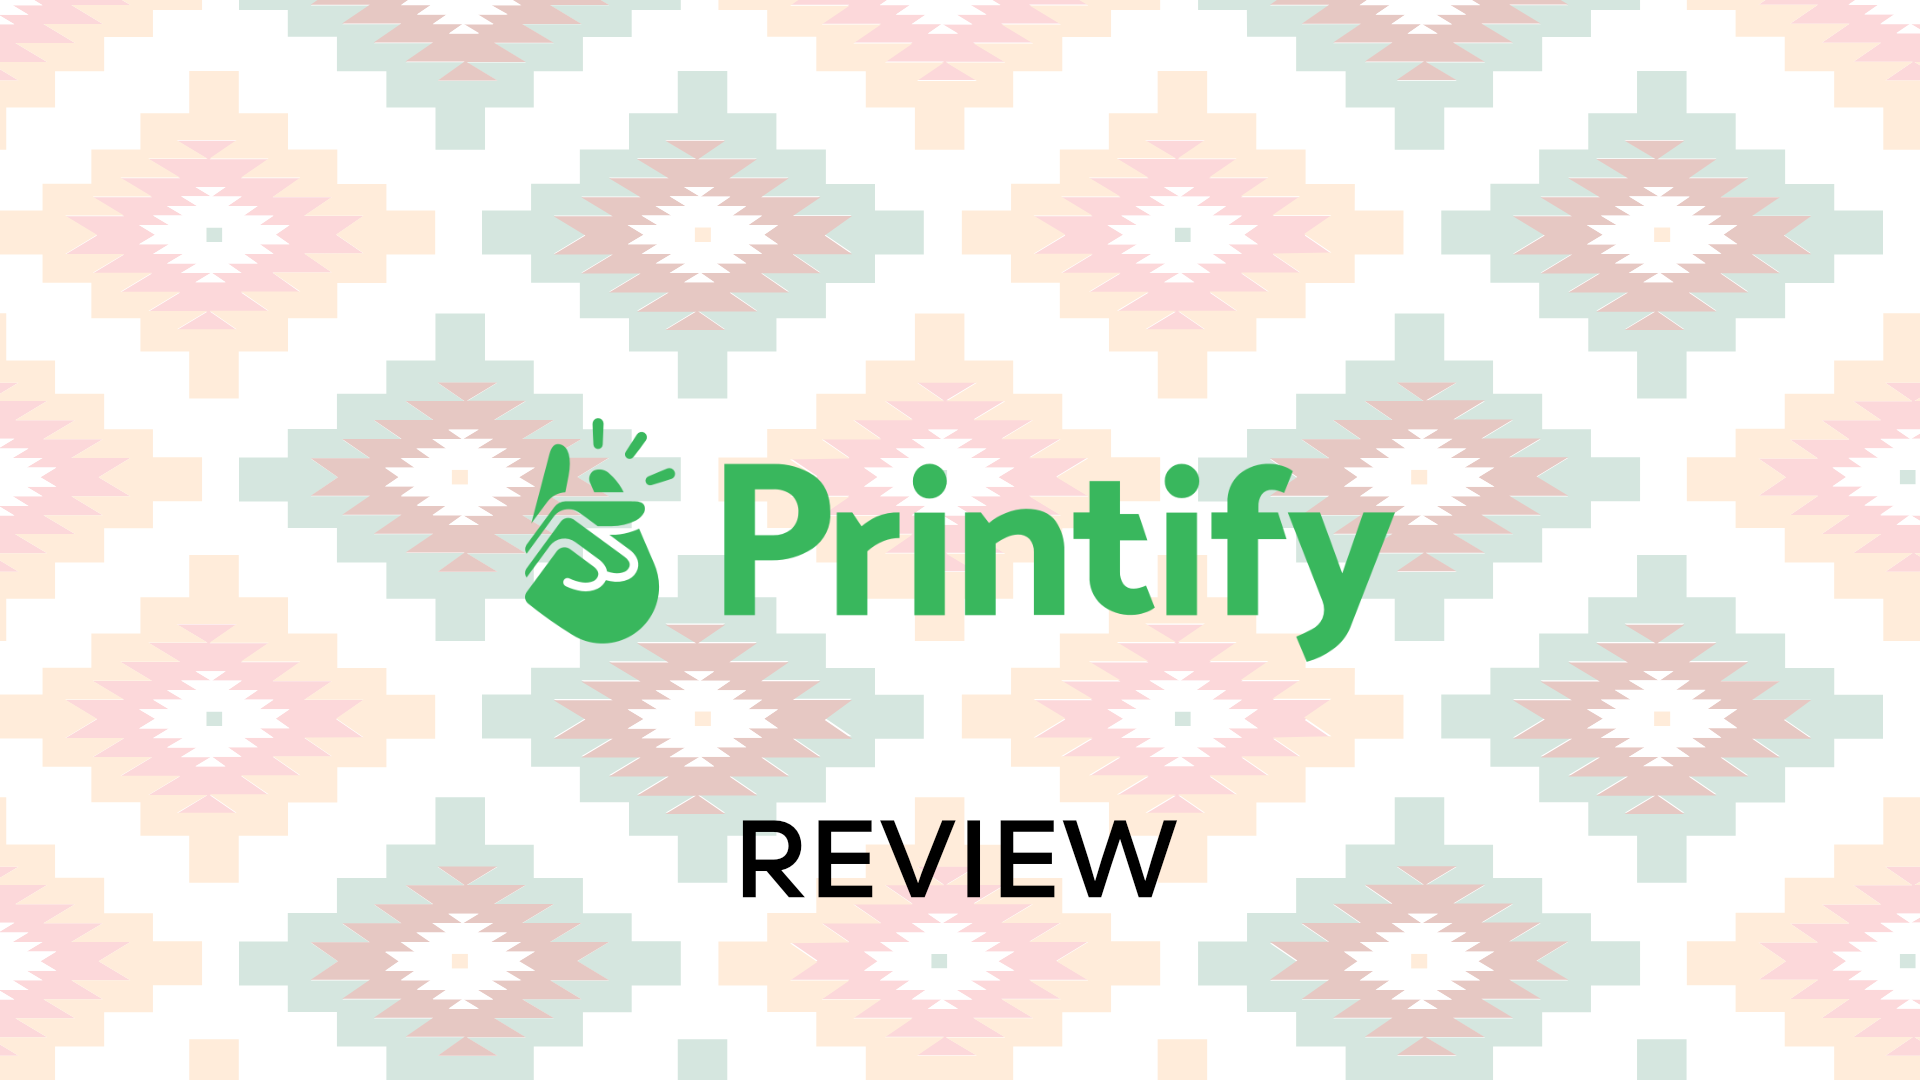 Printify Review: The Lowest Prices, But at What Cost?